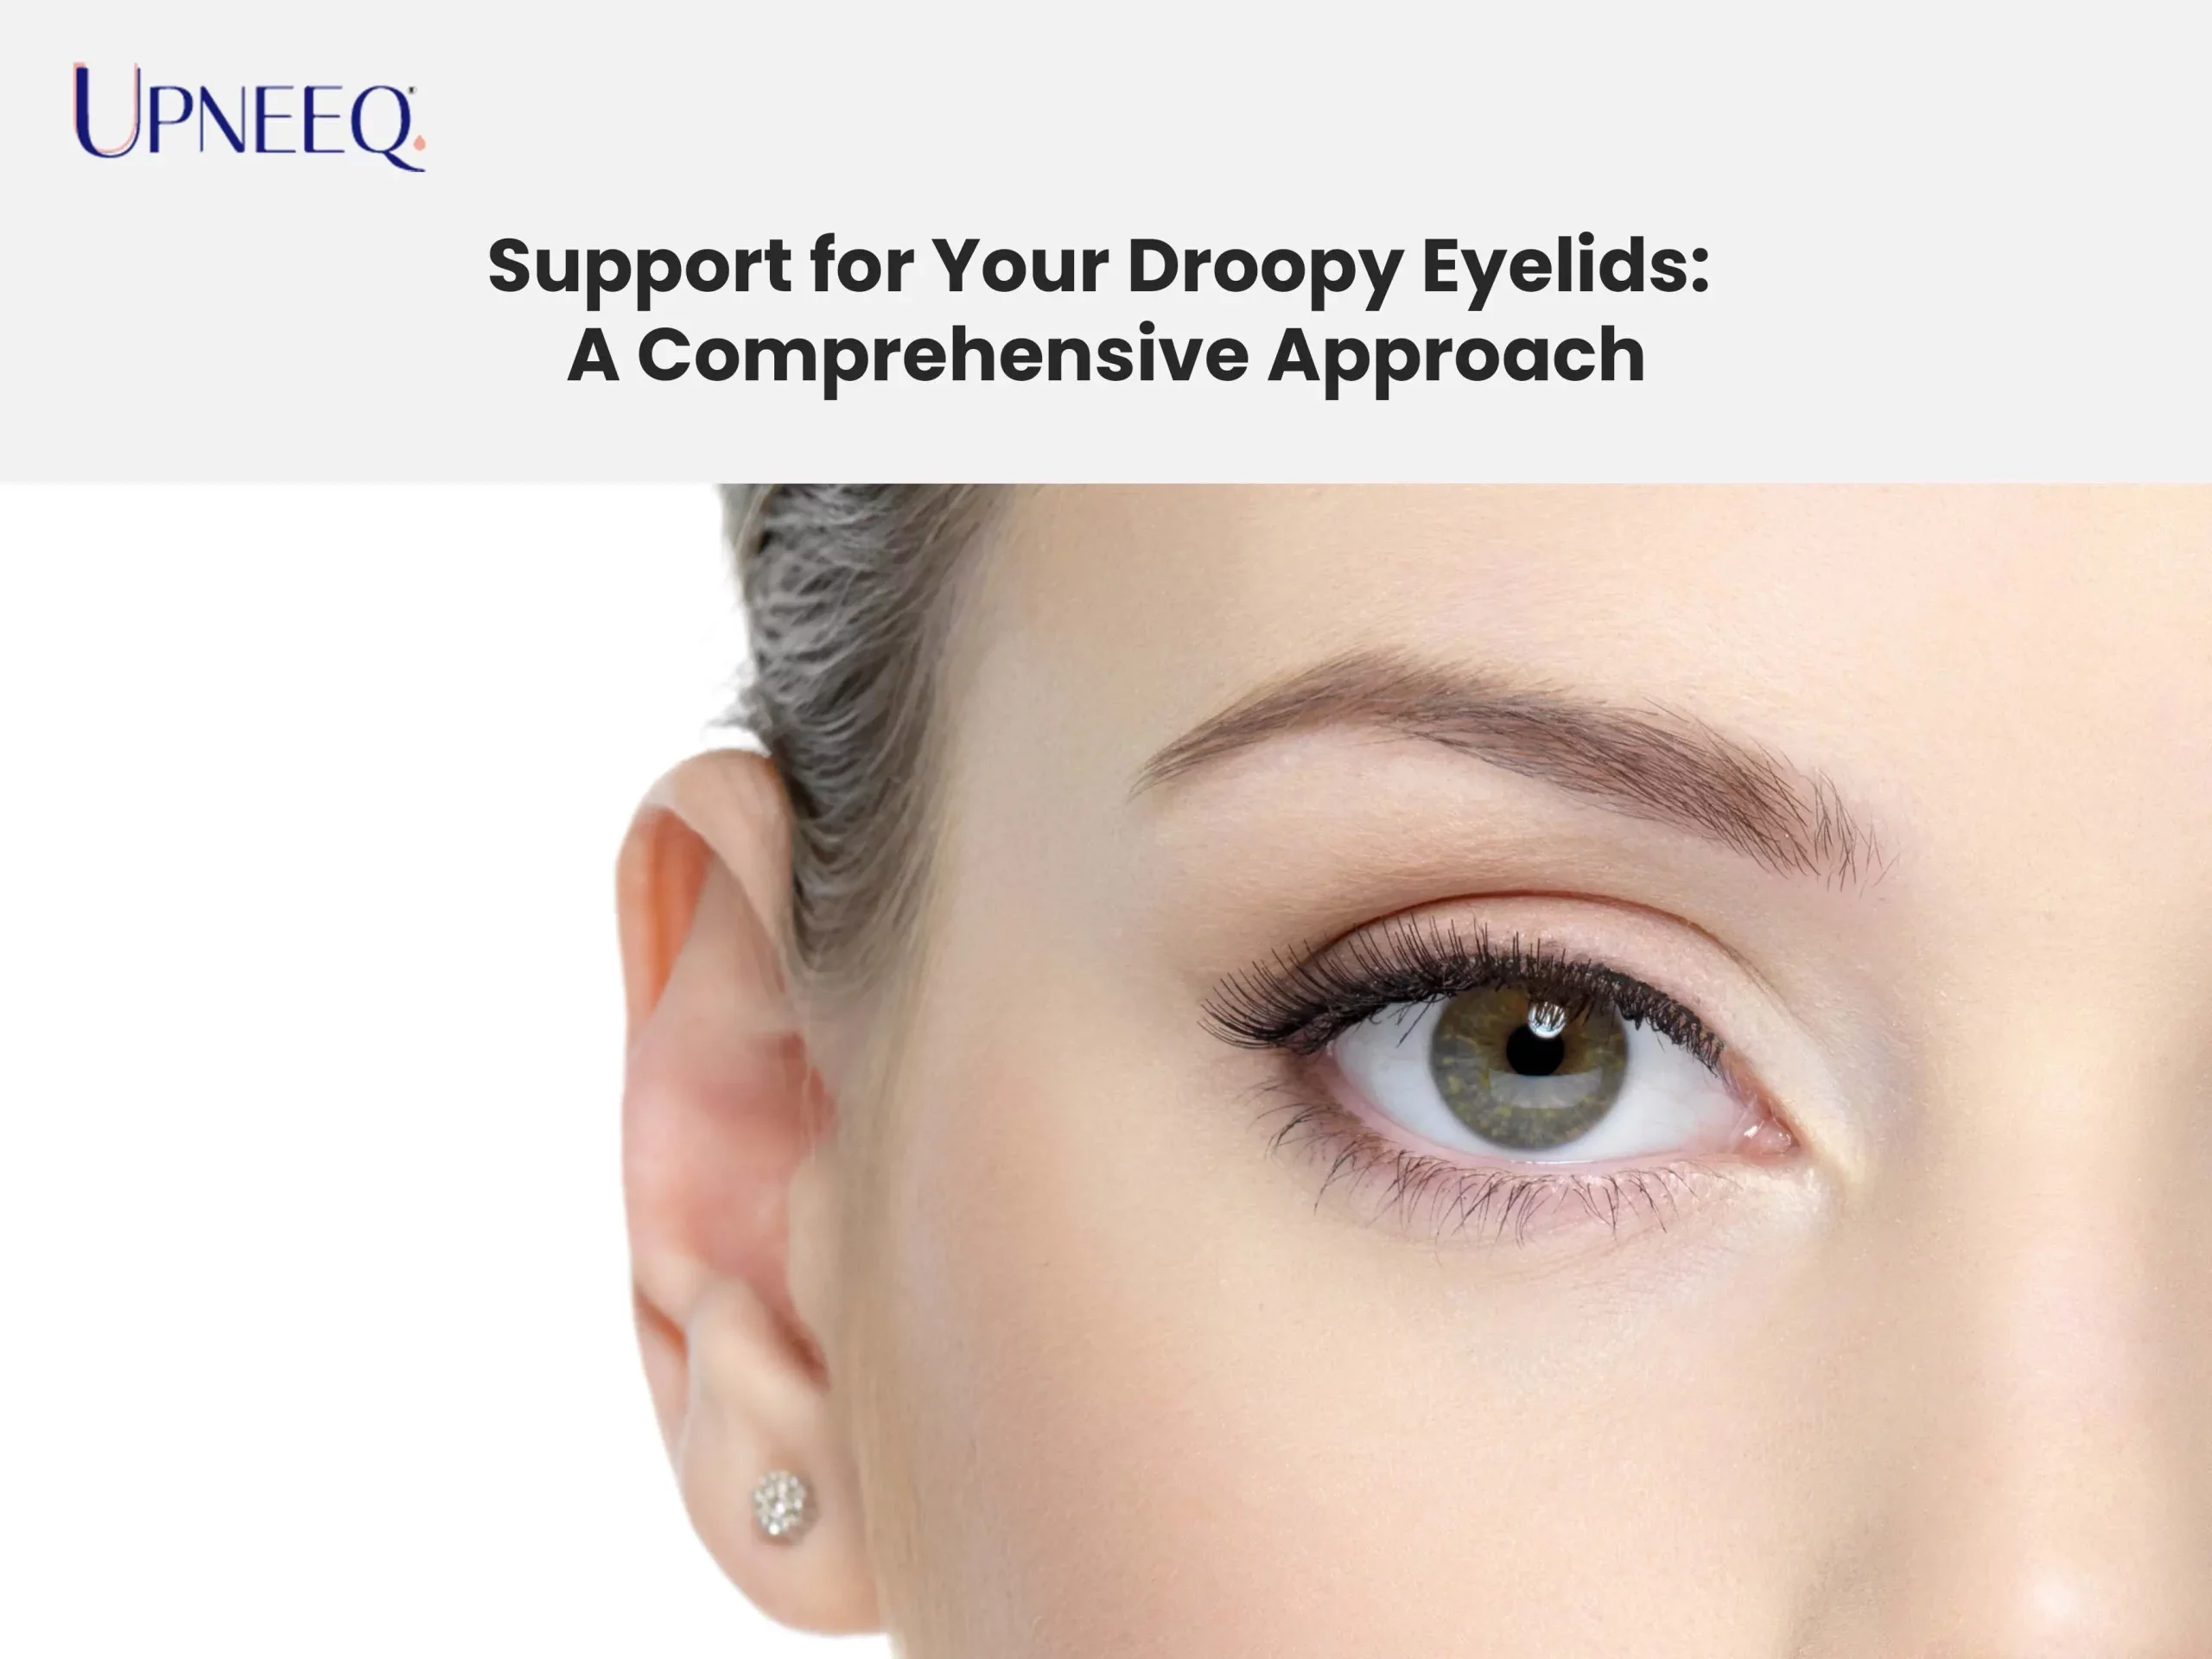 Support for Your Droopy Eyelids: A Comprehensive Approach